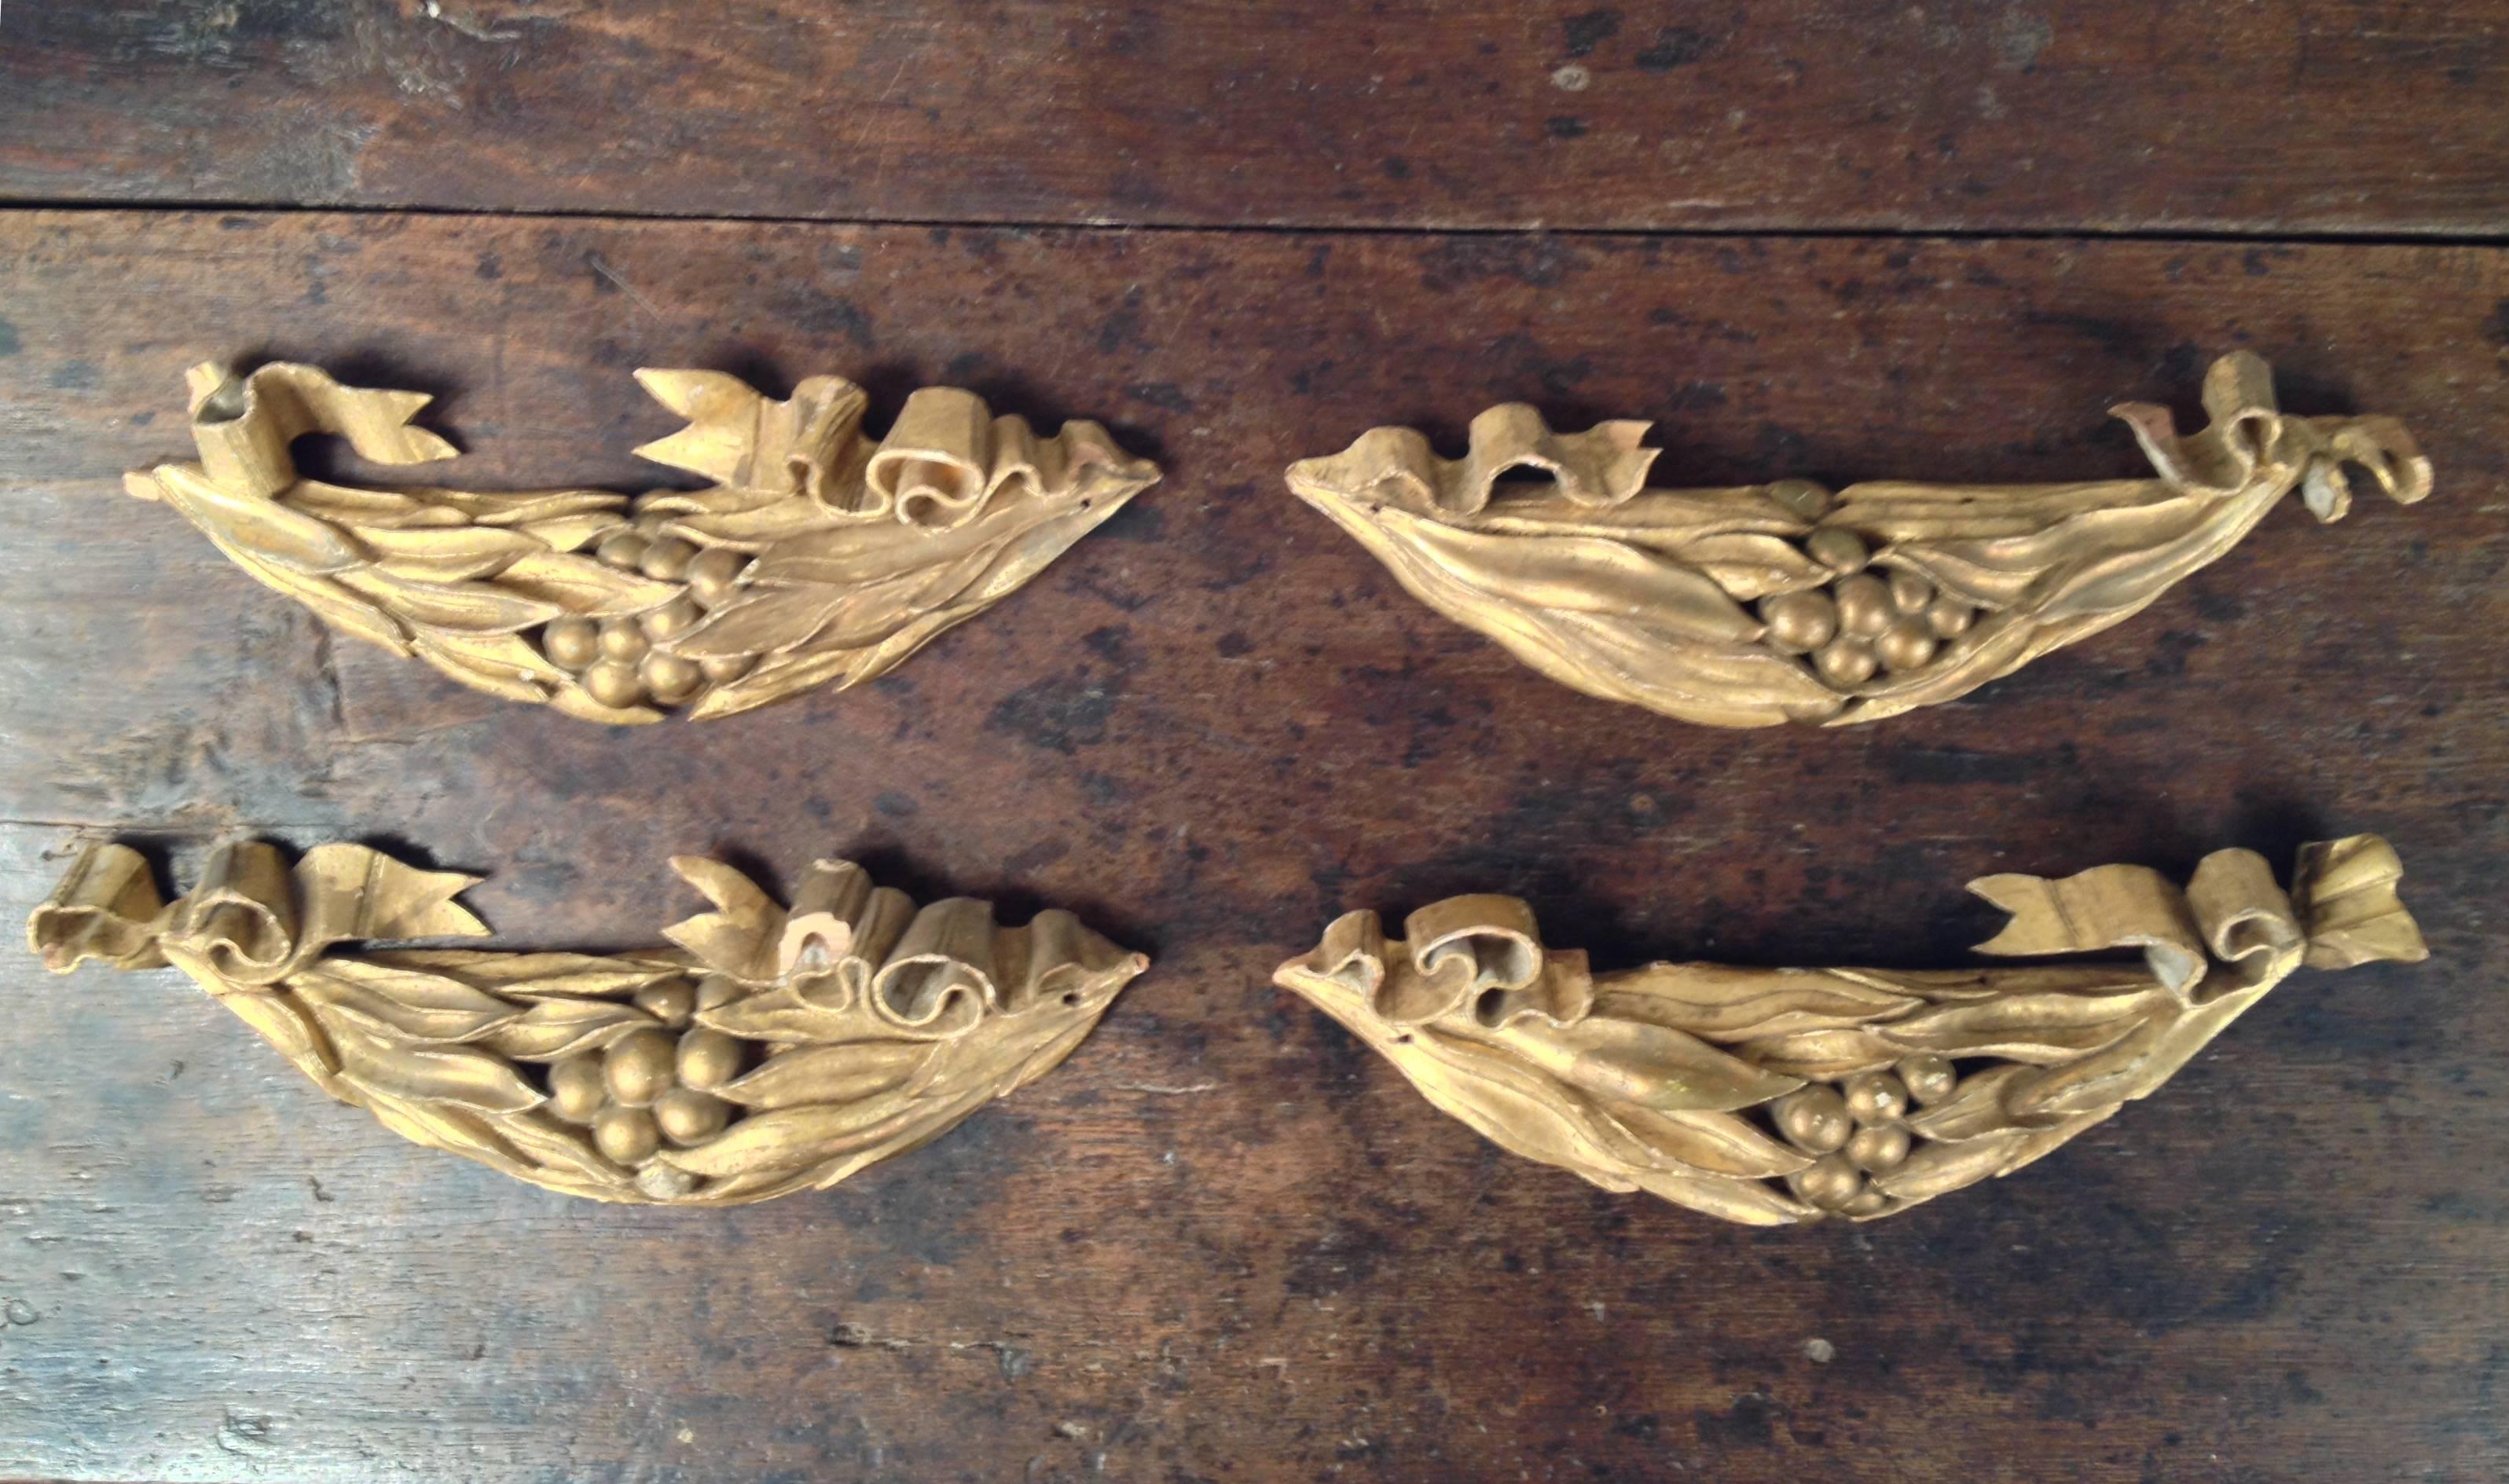 Collection of four beautiful and detailed gilded wood carvings, France, circa 1800.
Original finish and wonderful patina.